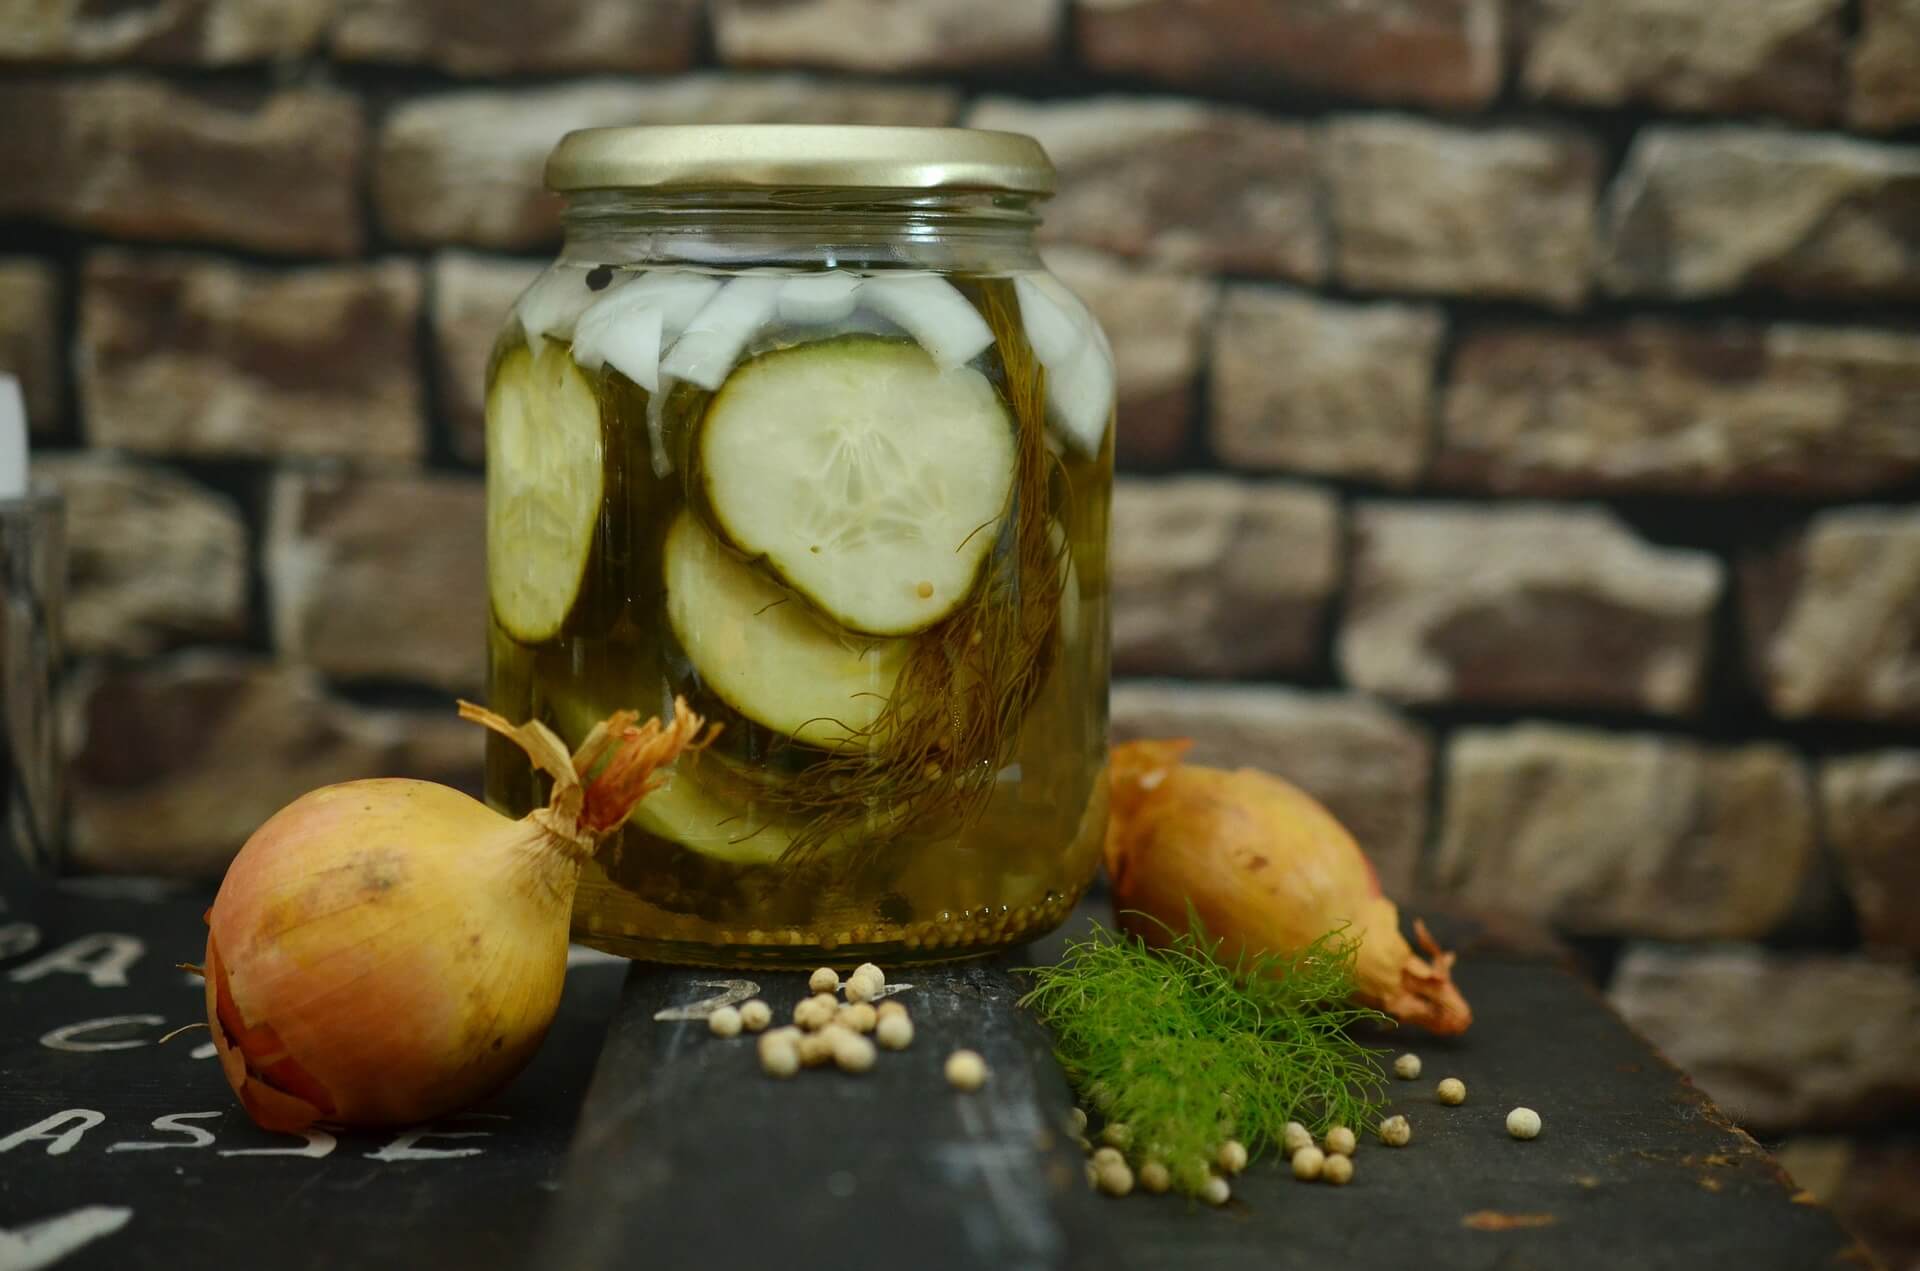 Foods with higher natural or added acidity (low pH), like pickles, tend to not need a pressure canning device. 